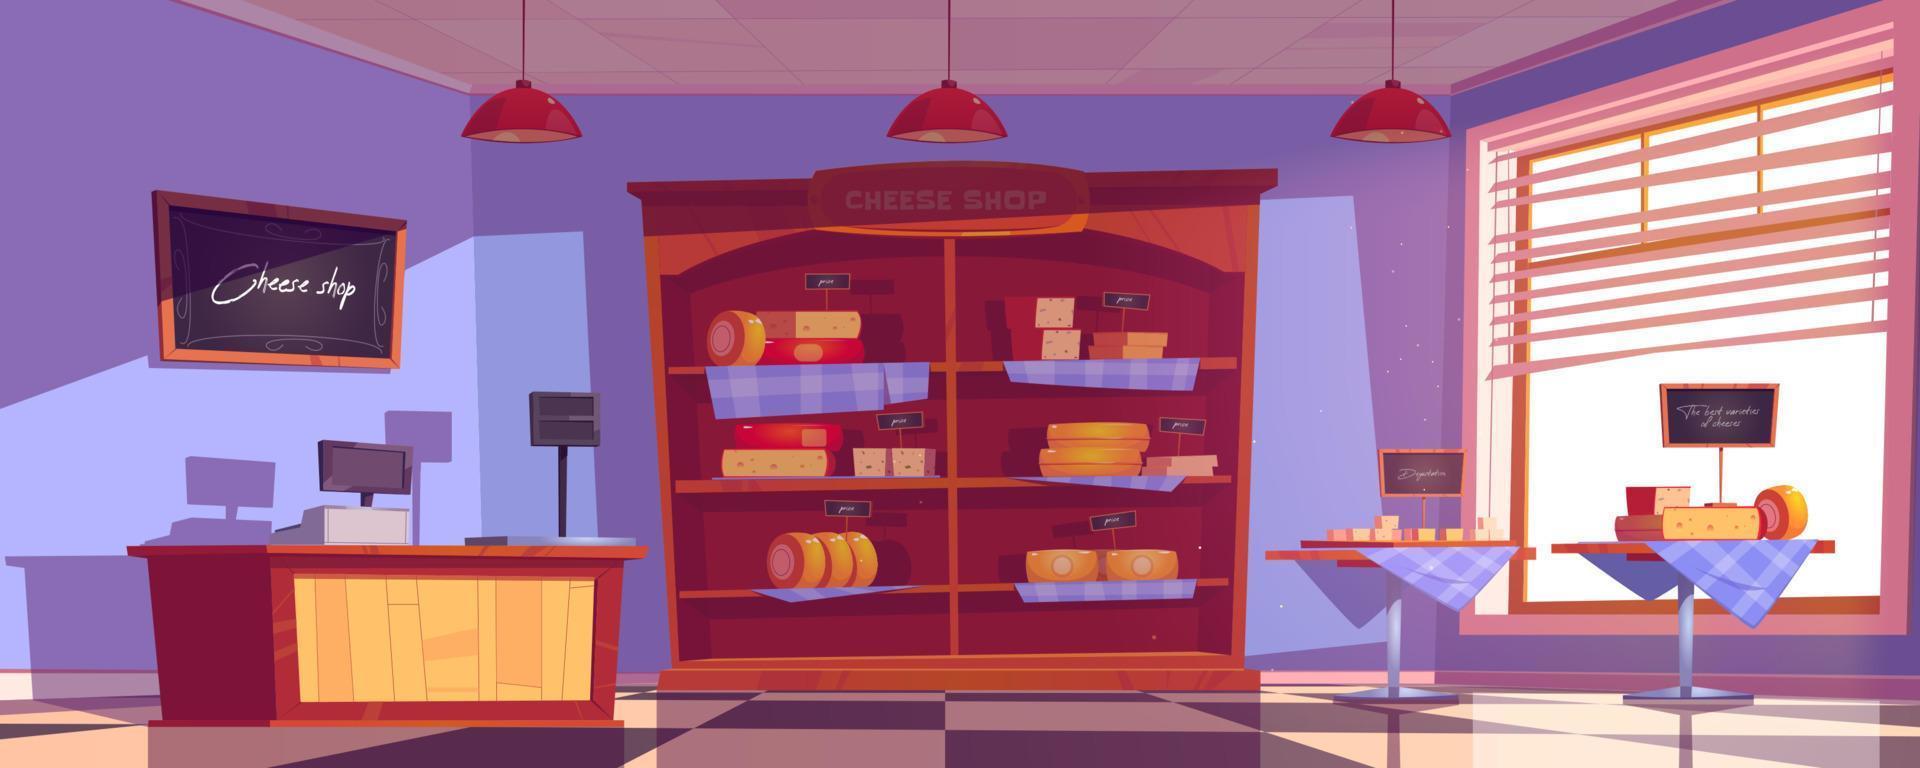 Empty cheese shop interior with tables and shelves vector